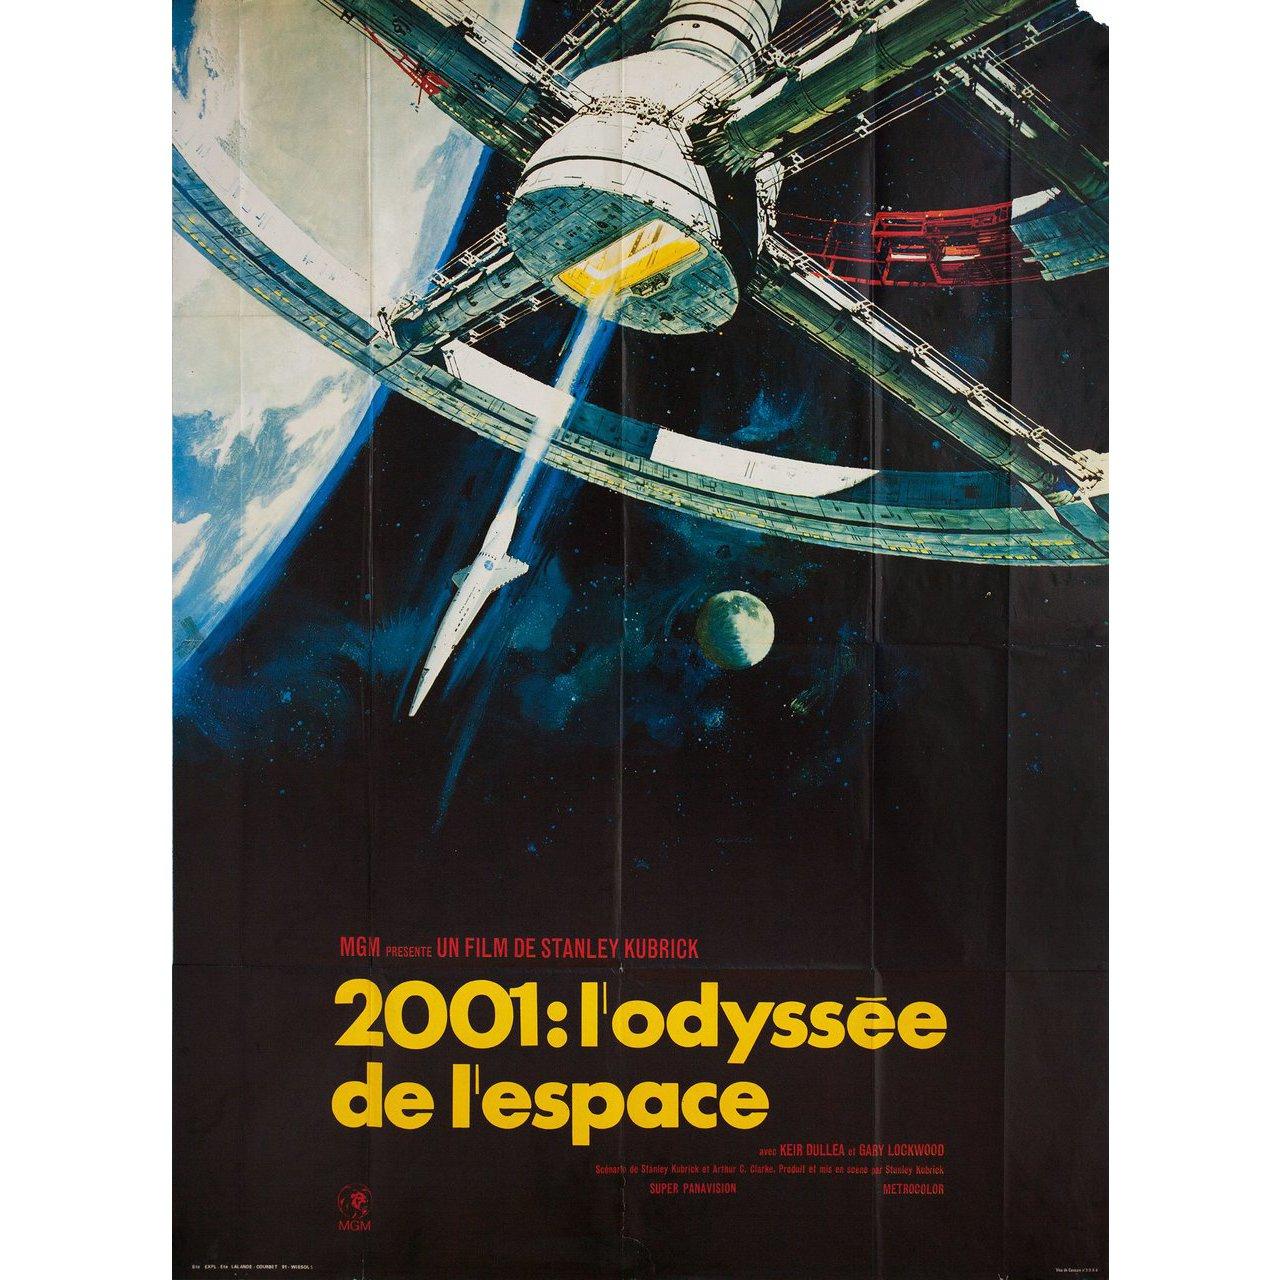 Original 1970s re-release French grande poster by Robert McCall for the film 2001: A Space Odyssey directed by Stanley Kubrick with Keir Dullea / Gary Lockwood / William Sylvester / Daniel Richter. Good-very good condition, folded. Many original